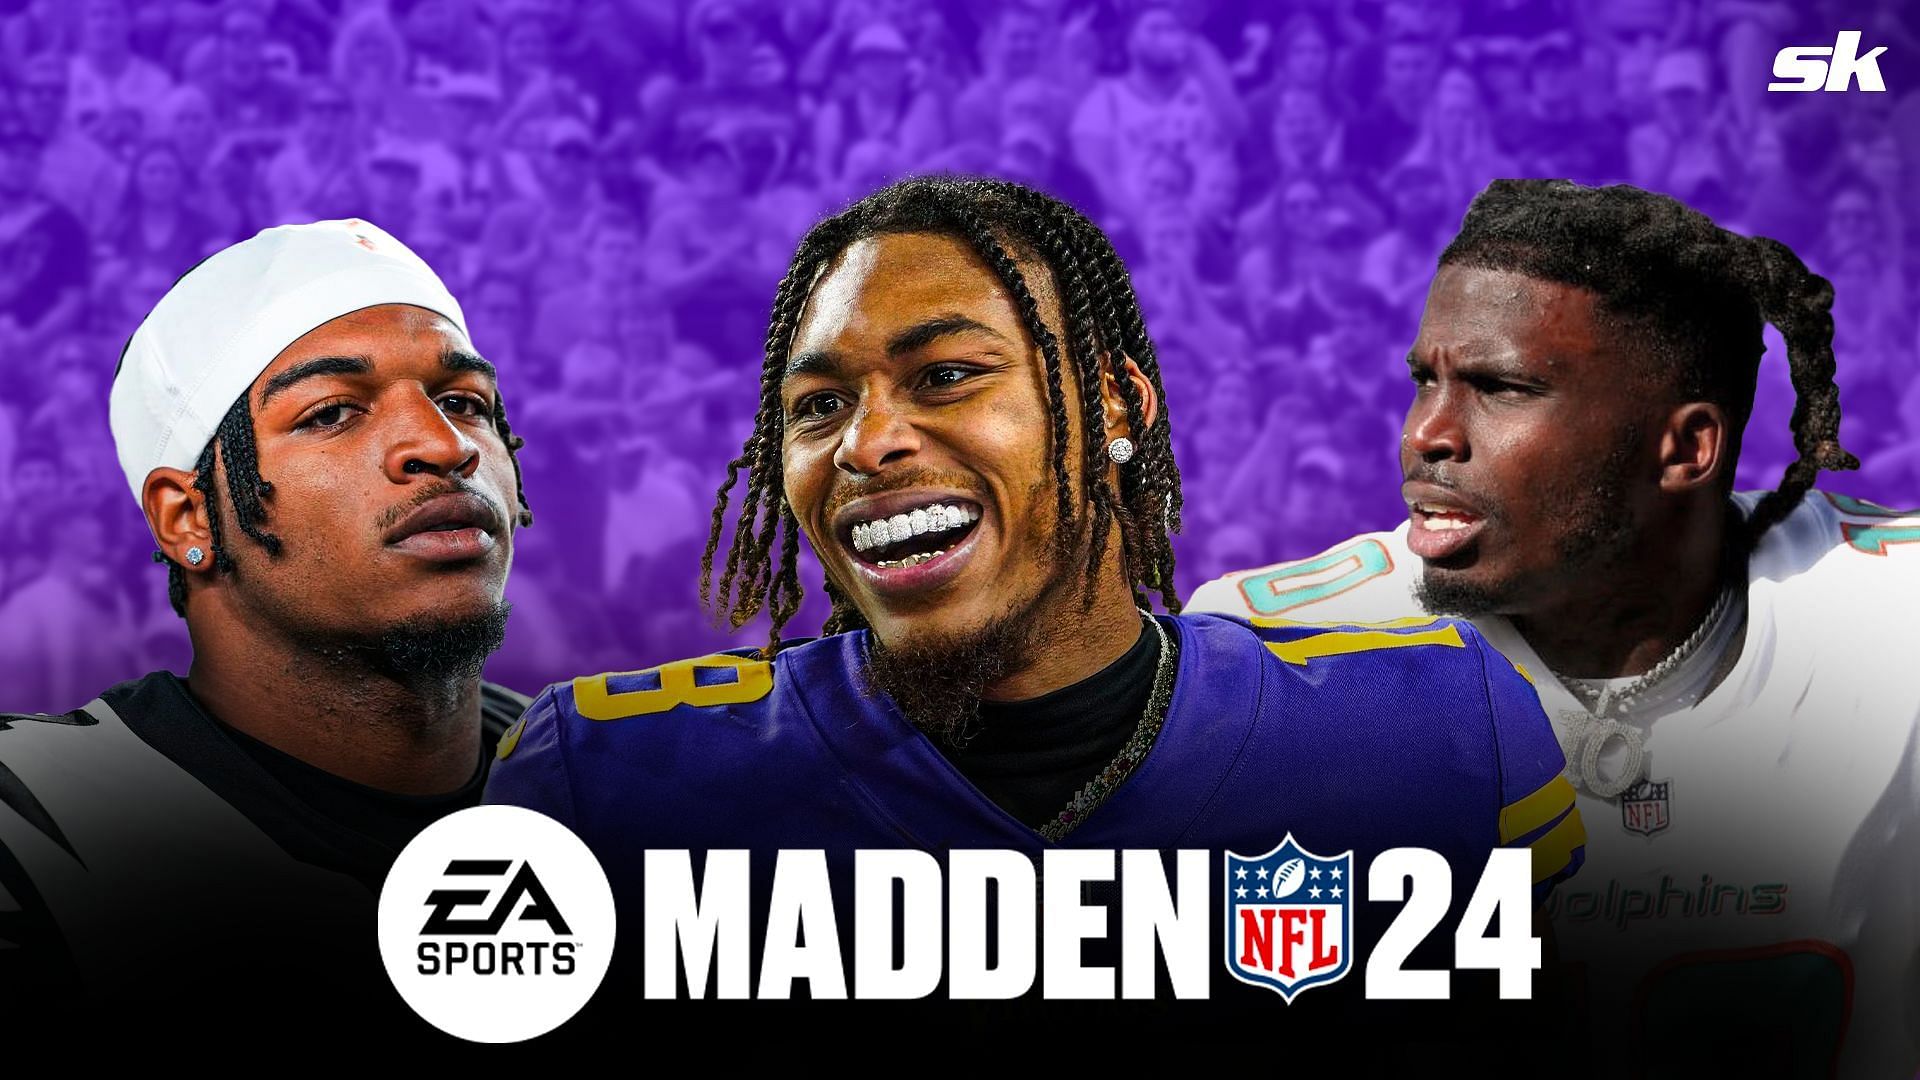 Top 10 receivers in Madden 24 feat. Tyreek Hill, Justin Jefferson, and others